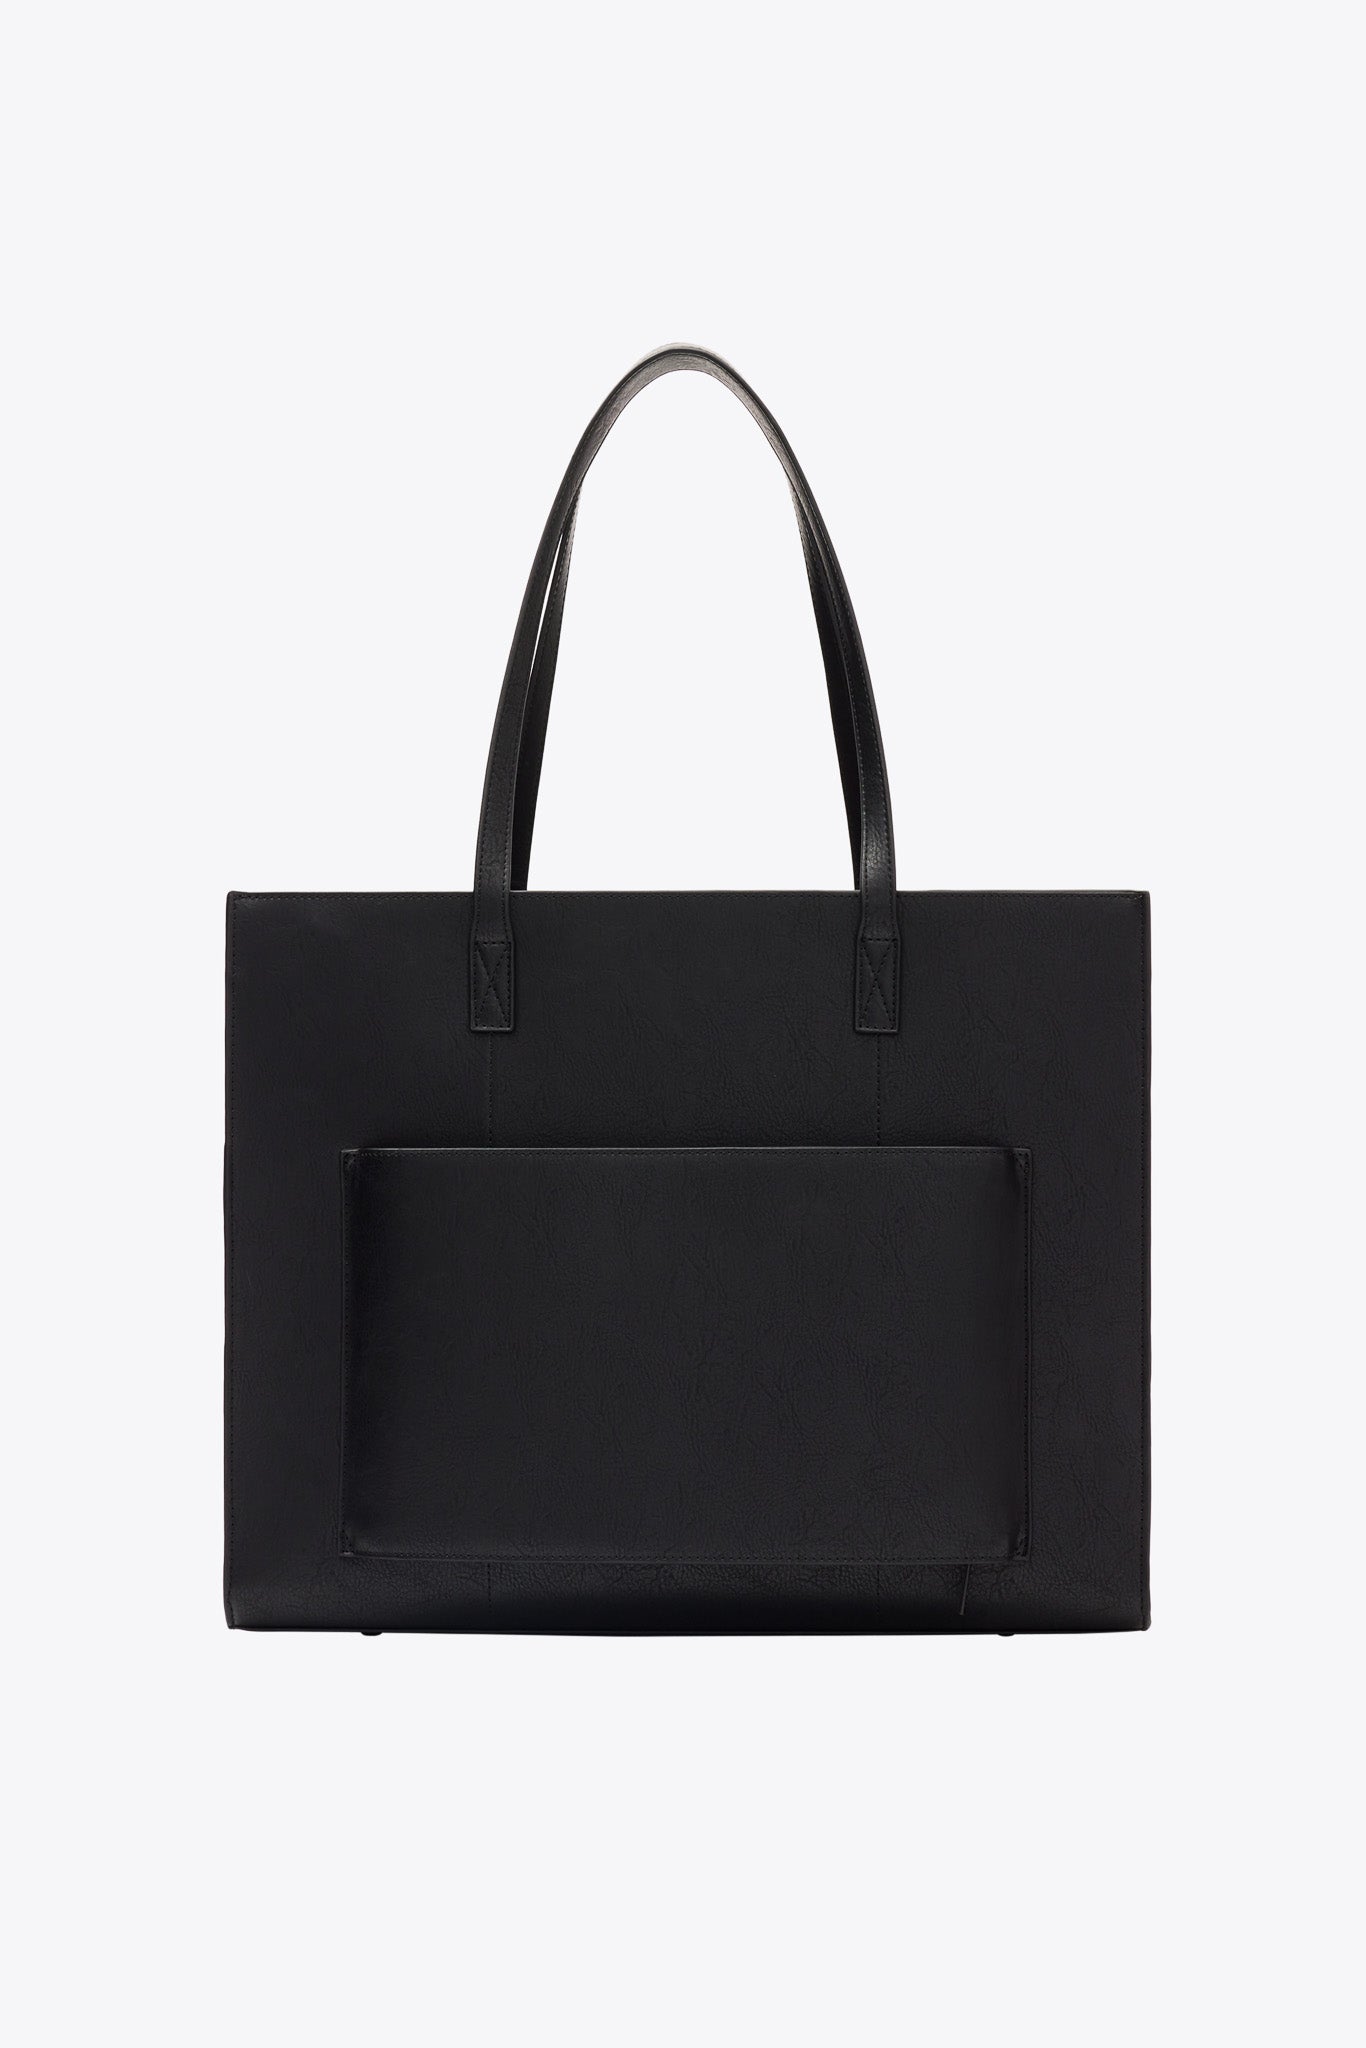 BÉIS 'The Large Work Tote' in Black - Womens Large Laptop Bag In Black ...